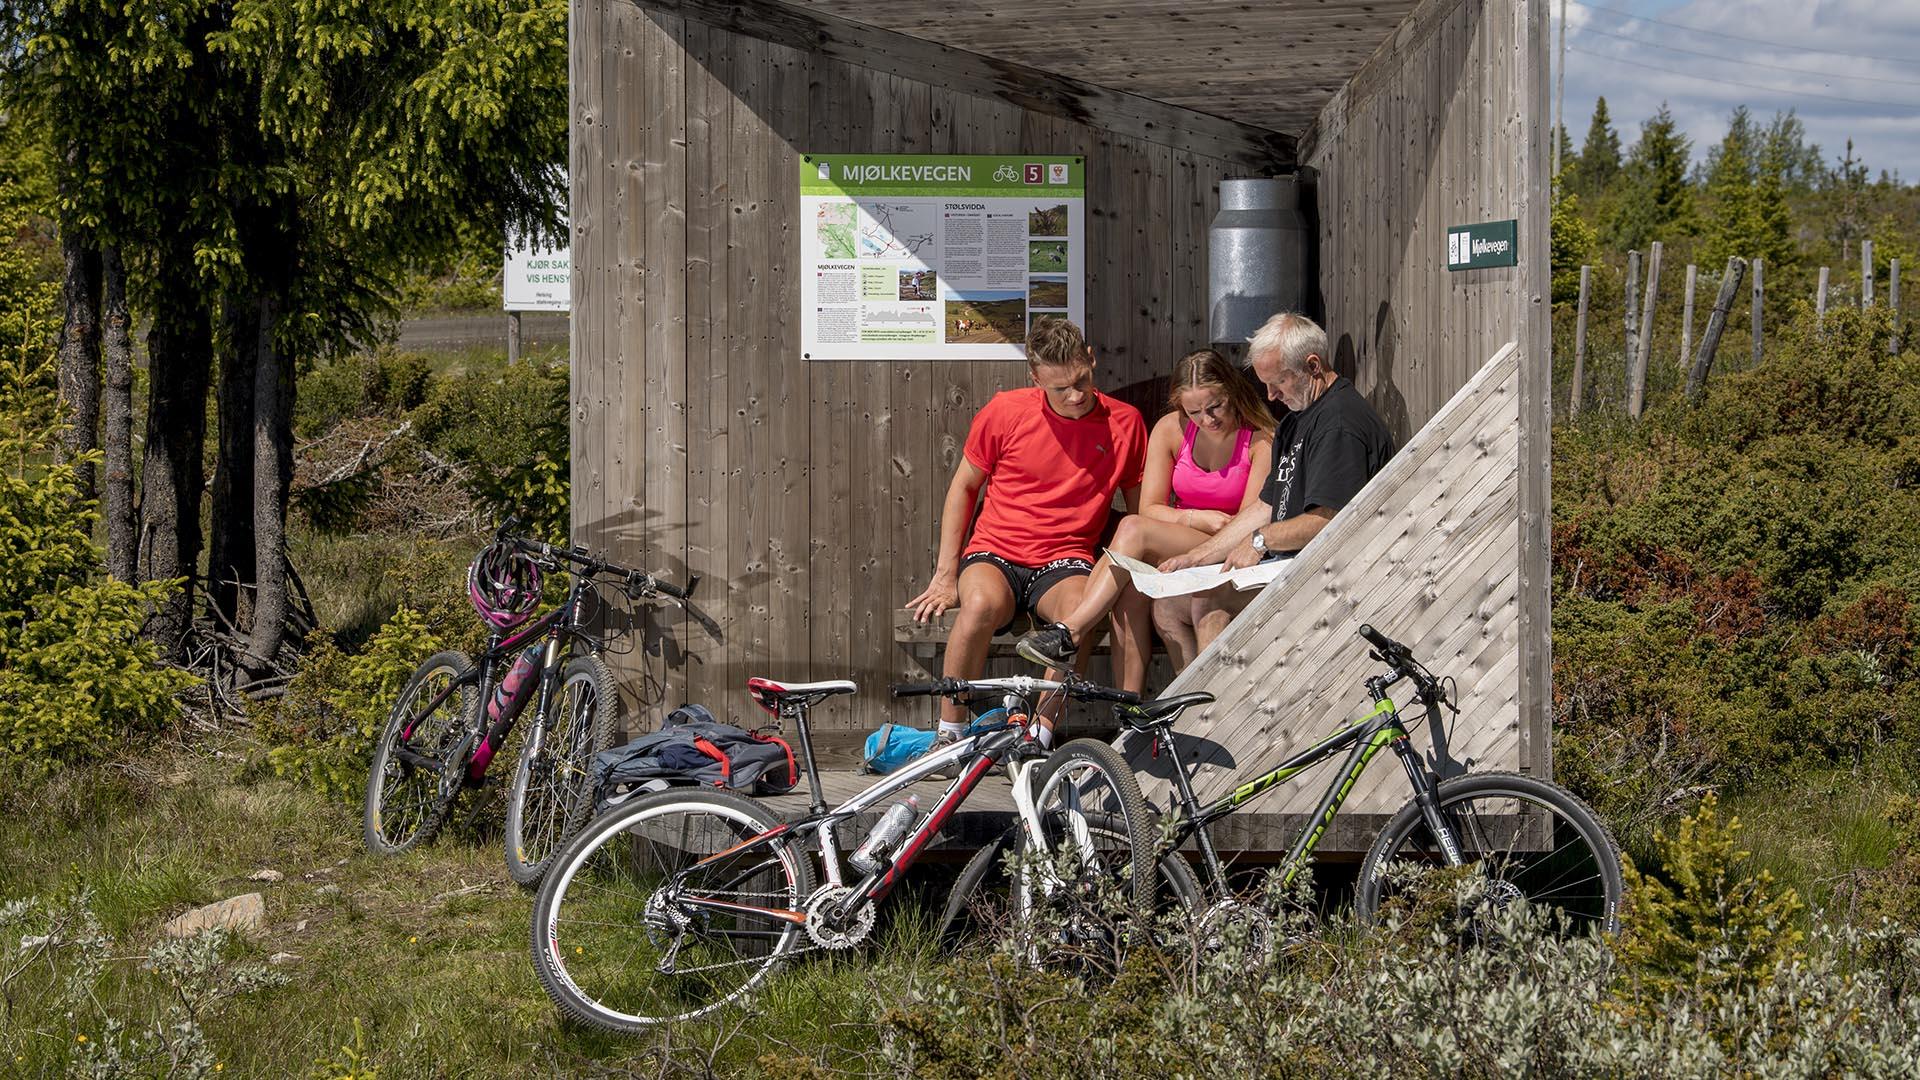 Three persons sit in a specially designed rest shelter along the cycling route Mjølkevegen.